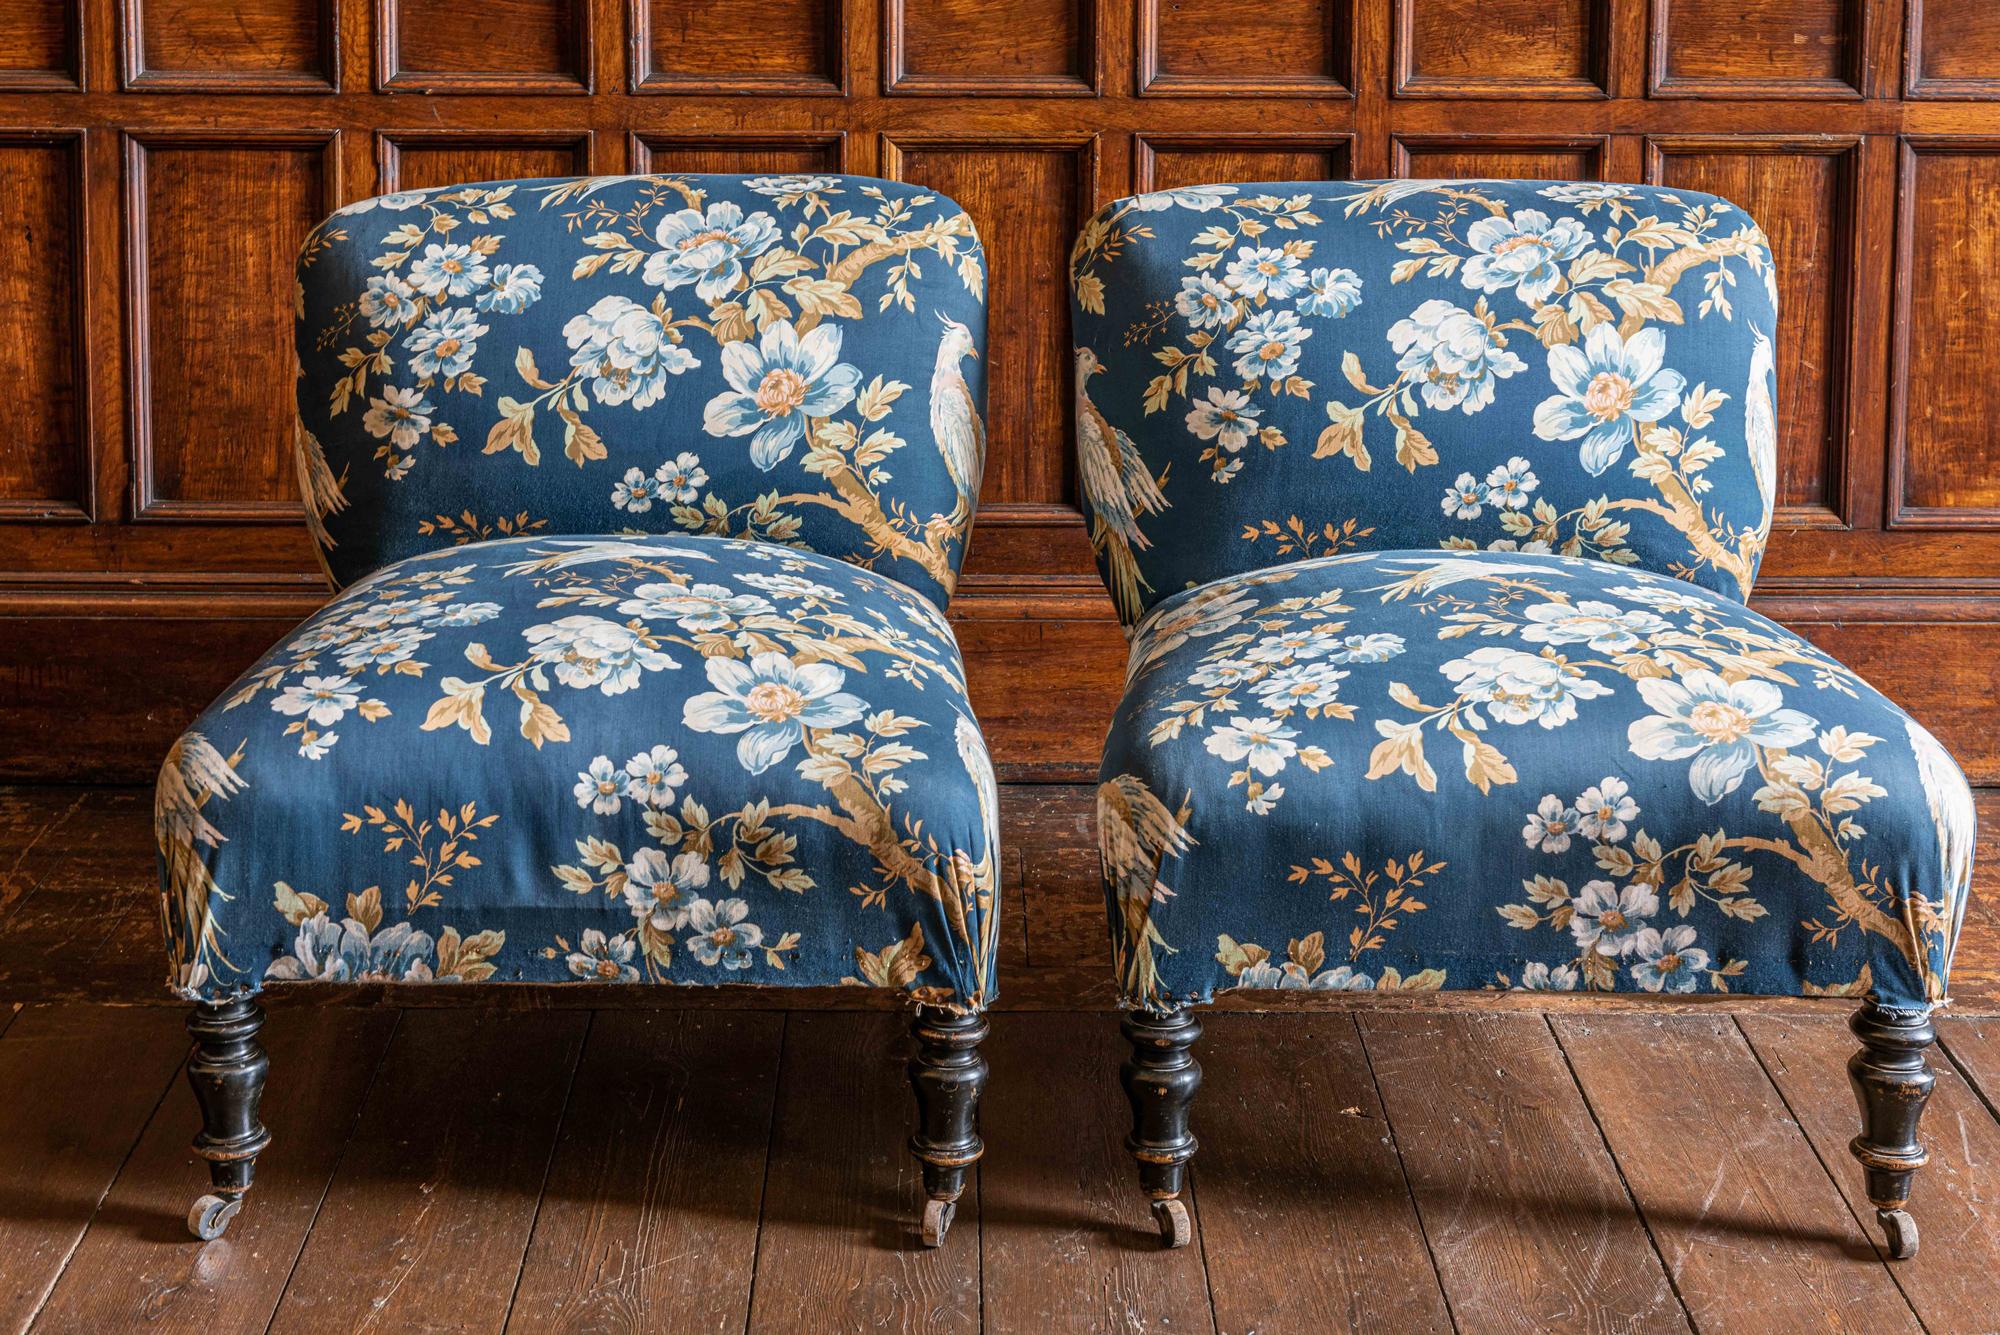 19th century pair of ebonized Napoleon III slipper chairs,
circa 1860.

Pair of French slipper chairs in existing bold aviary and floral fabric in great condition with the odd wear related mark.
Sat on ebonized turned legs with wooden